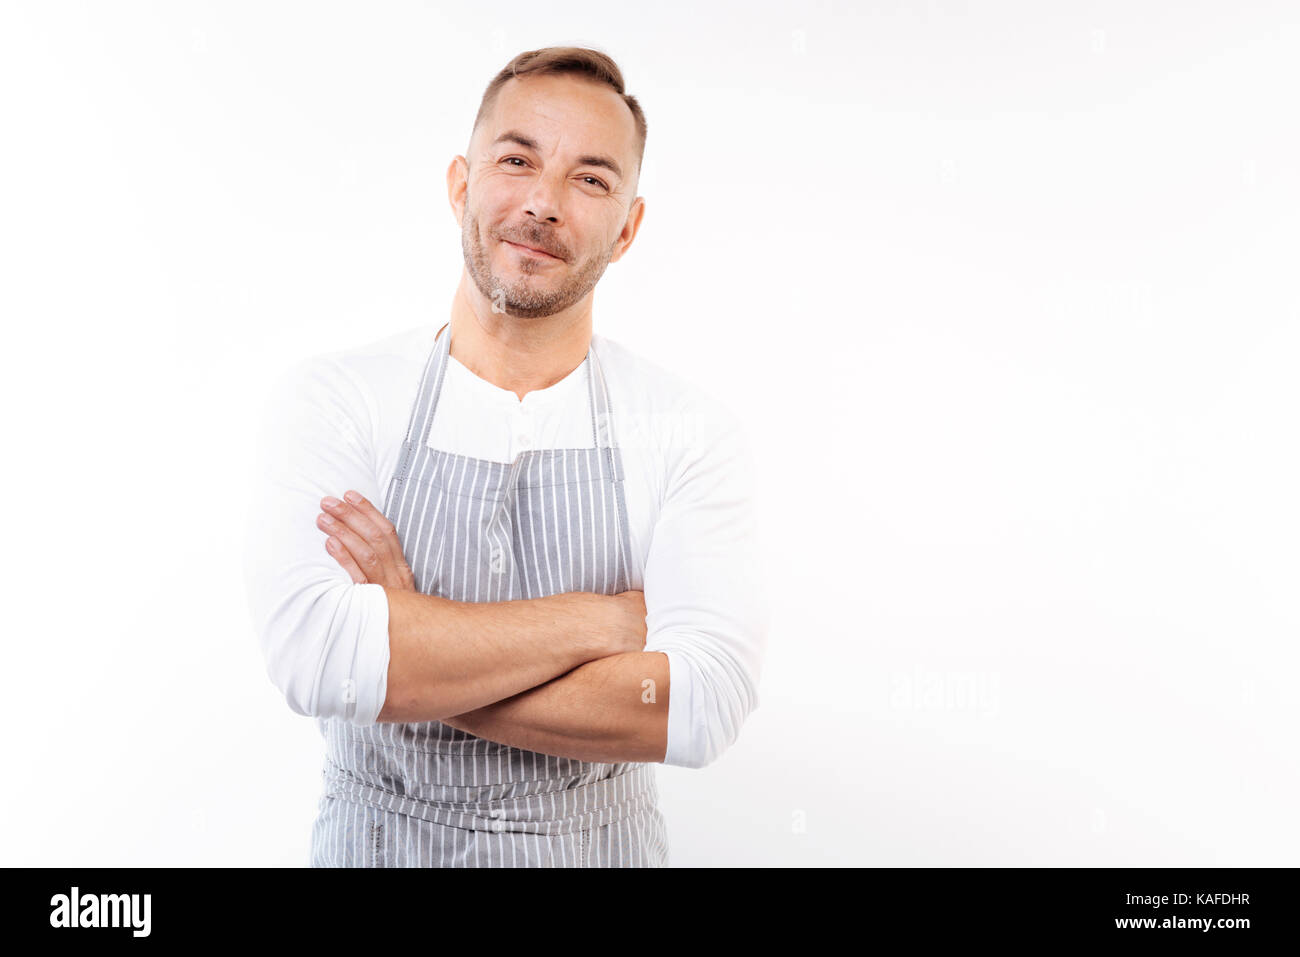 Smiling man in apron folding his arms across chest Stock Photo